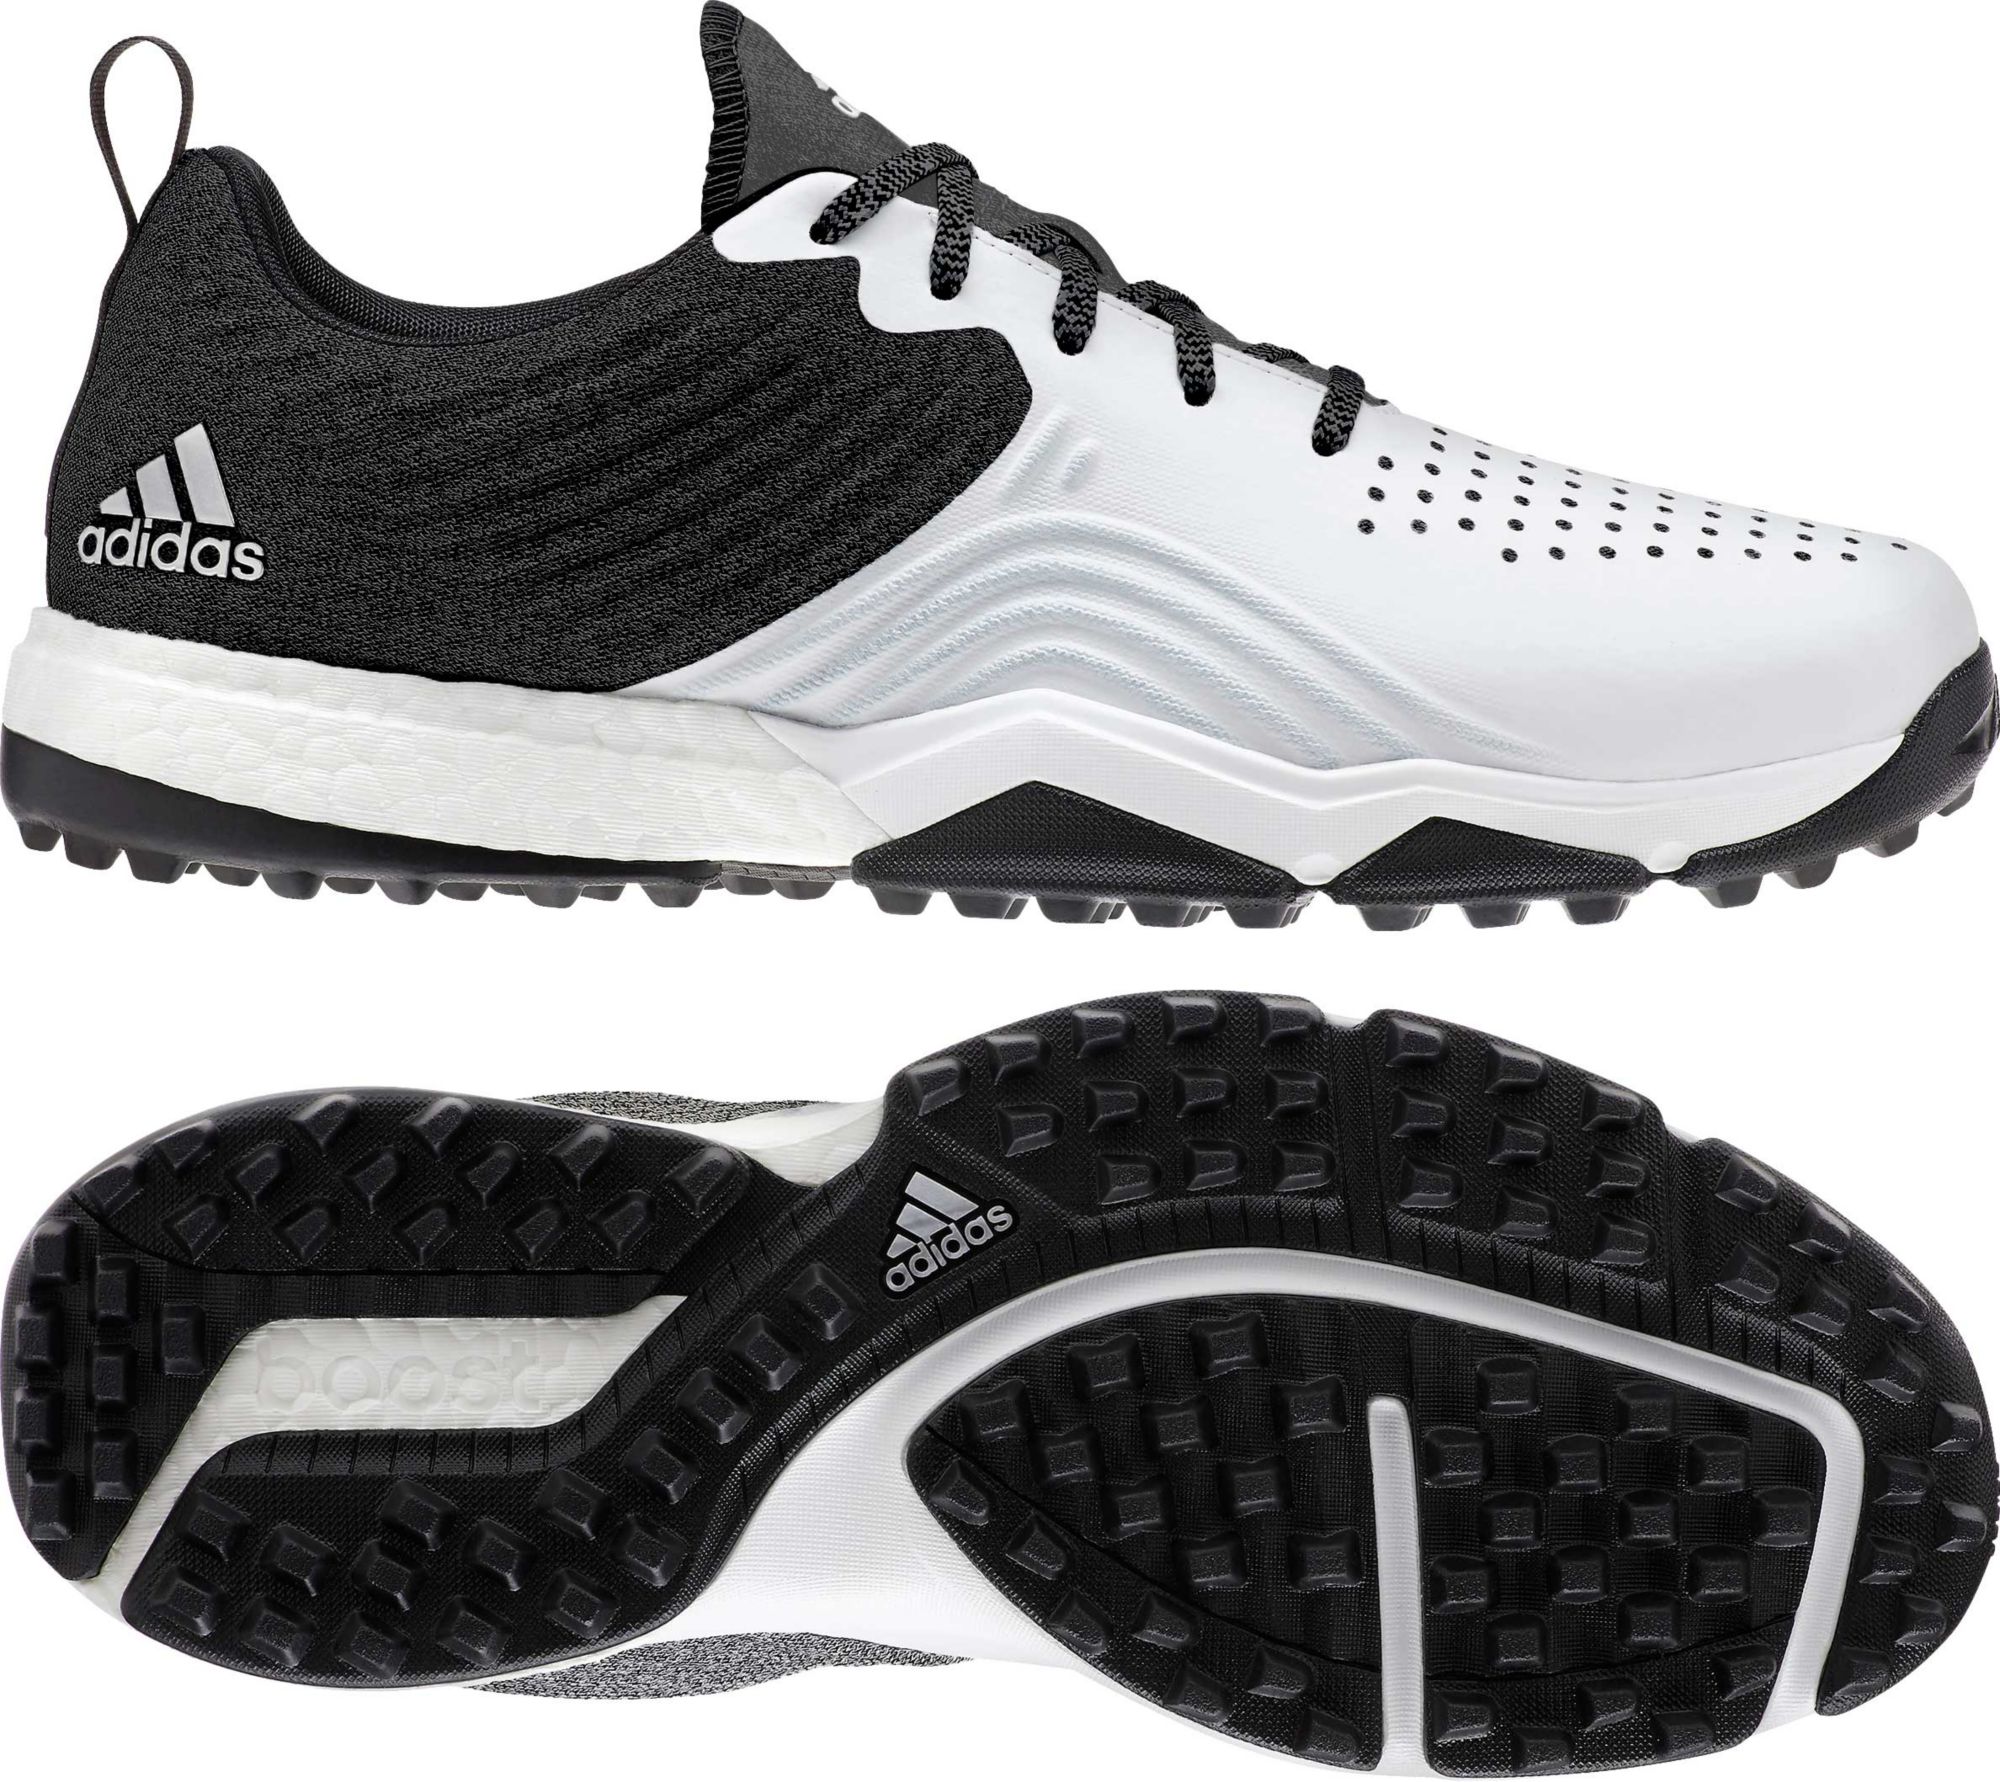 adipower 4orged golf shoes